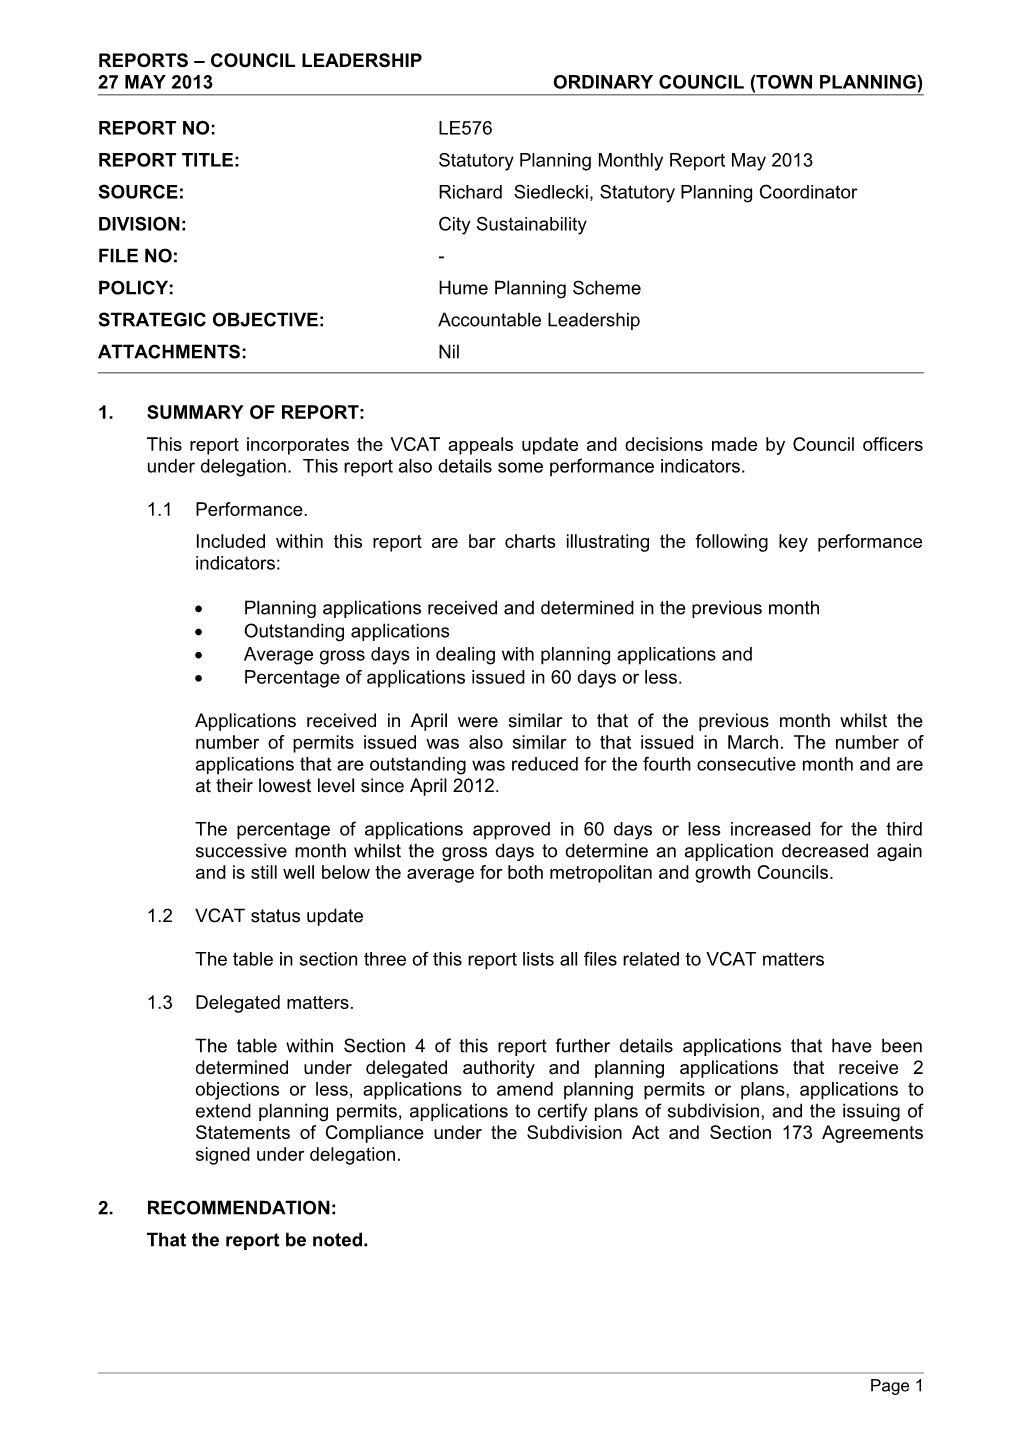 Ordinary Council (Town Planning) - 27 May 2013